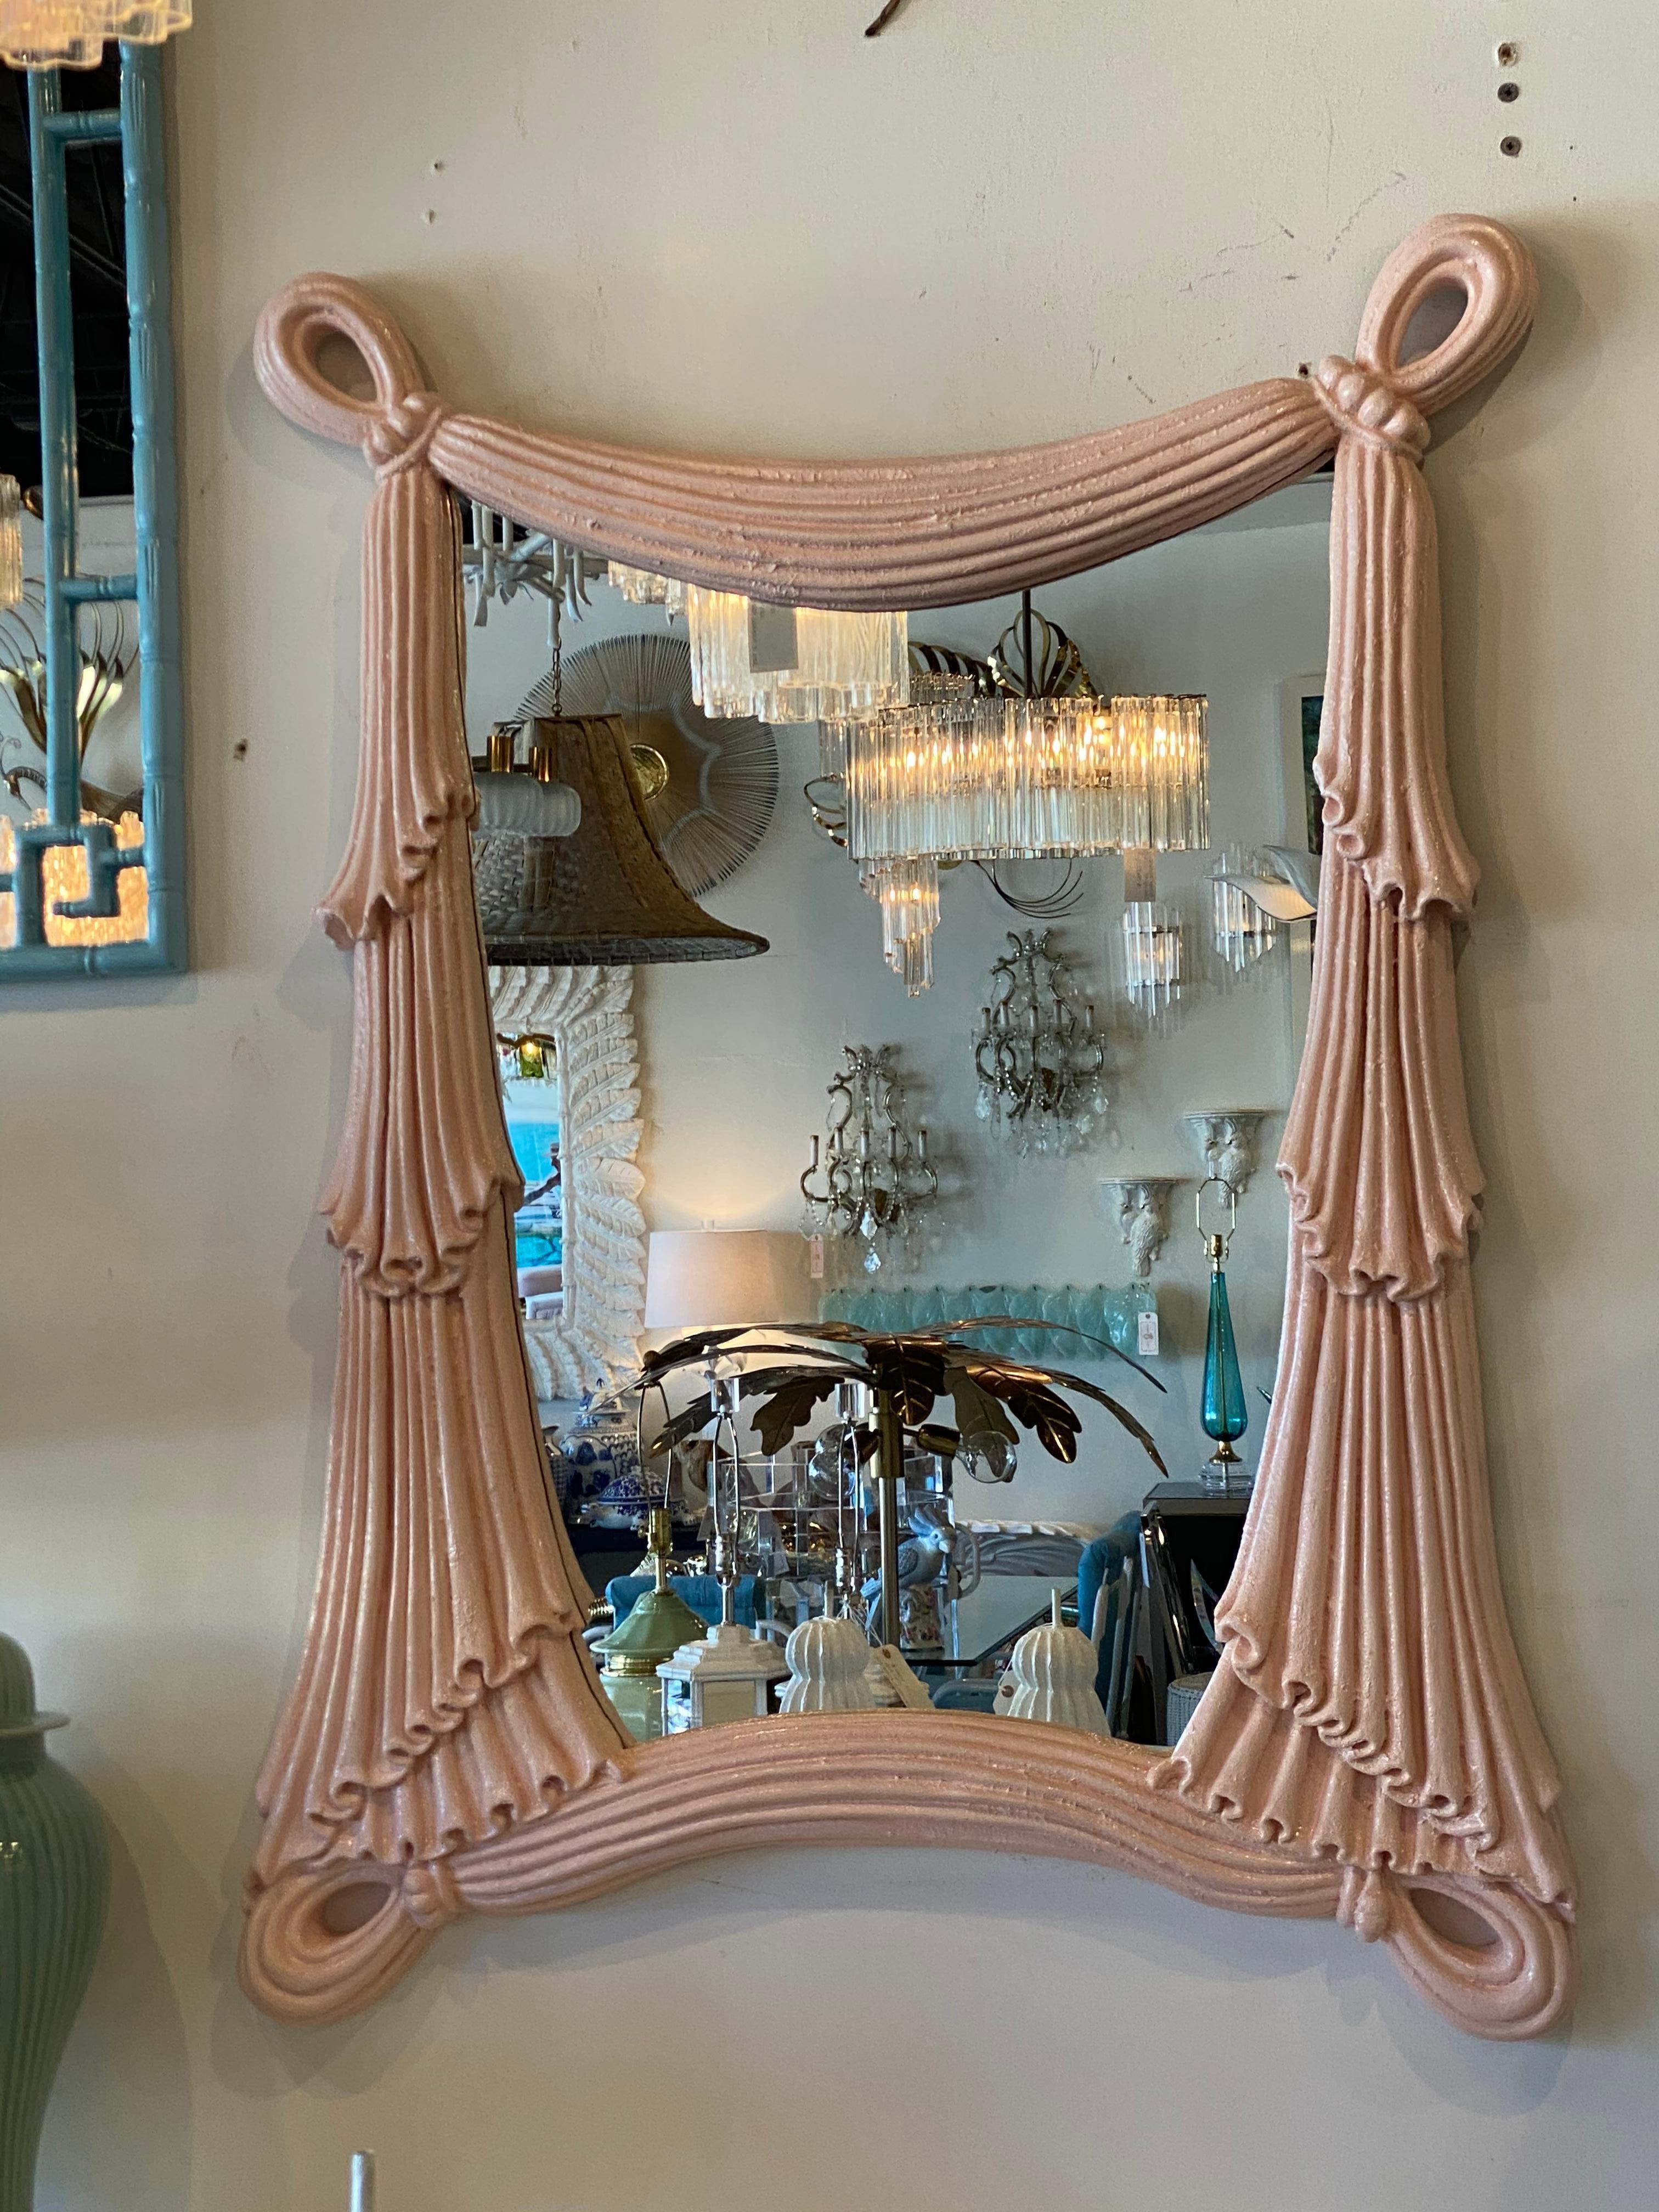 Vintage large wall mirror, lacquered in a peach coral color. Draped swag details make this mirror extra special! Made of a composite. Ready to hang.